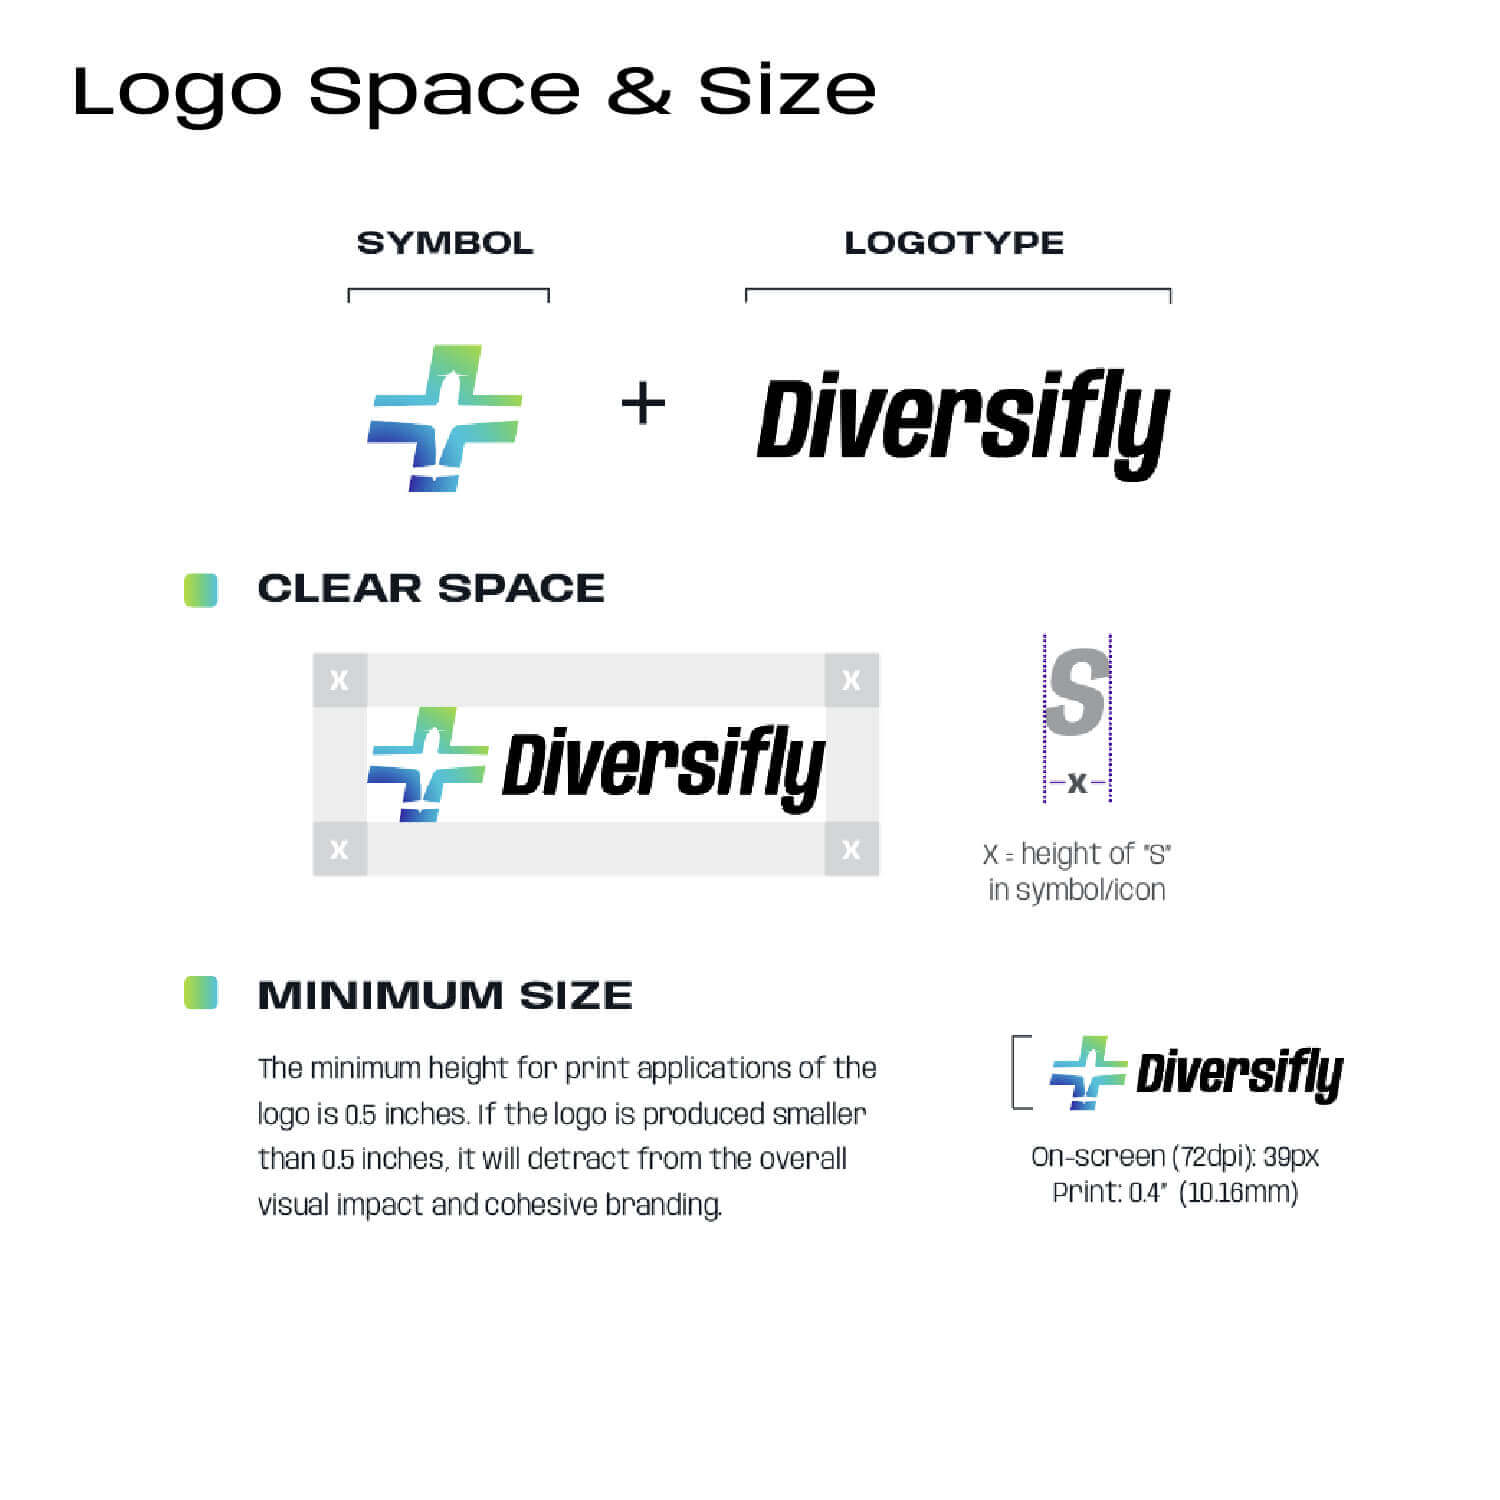 Diversifly logo space and size